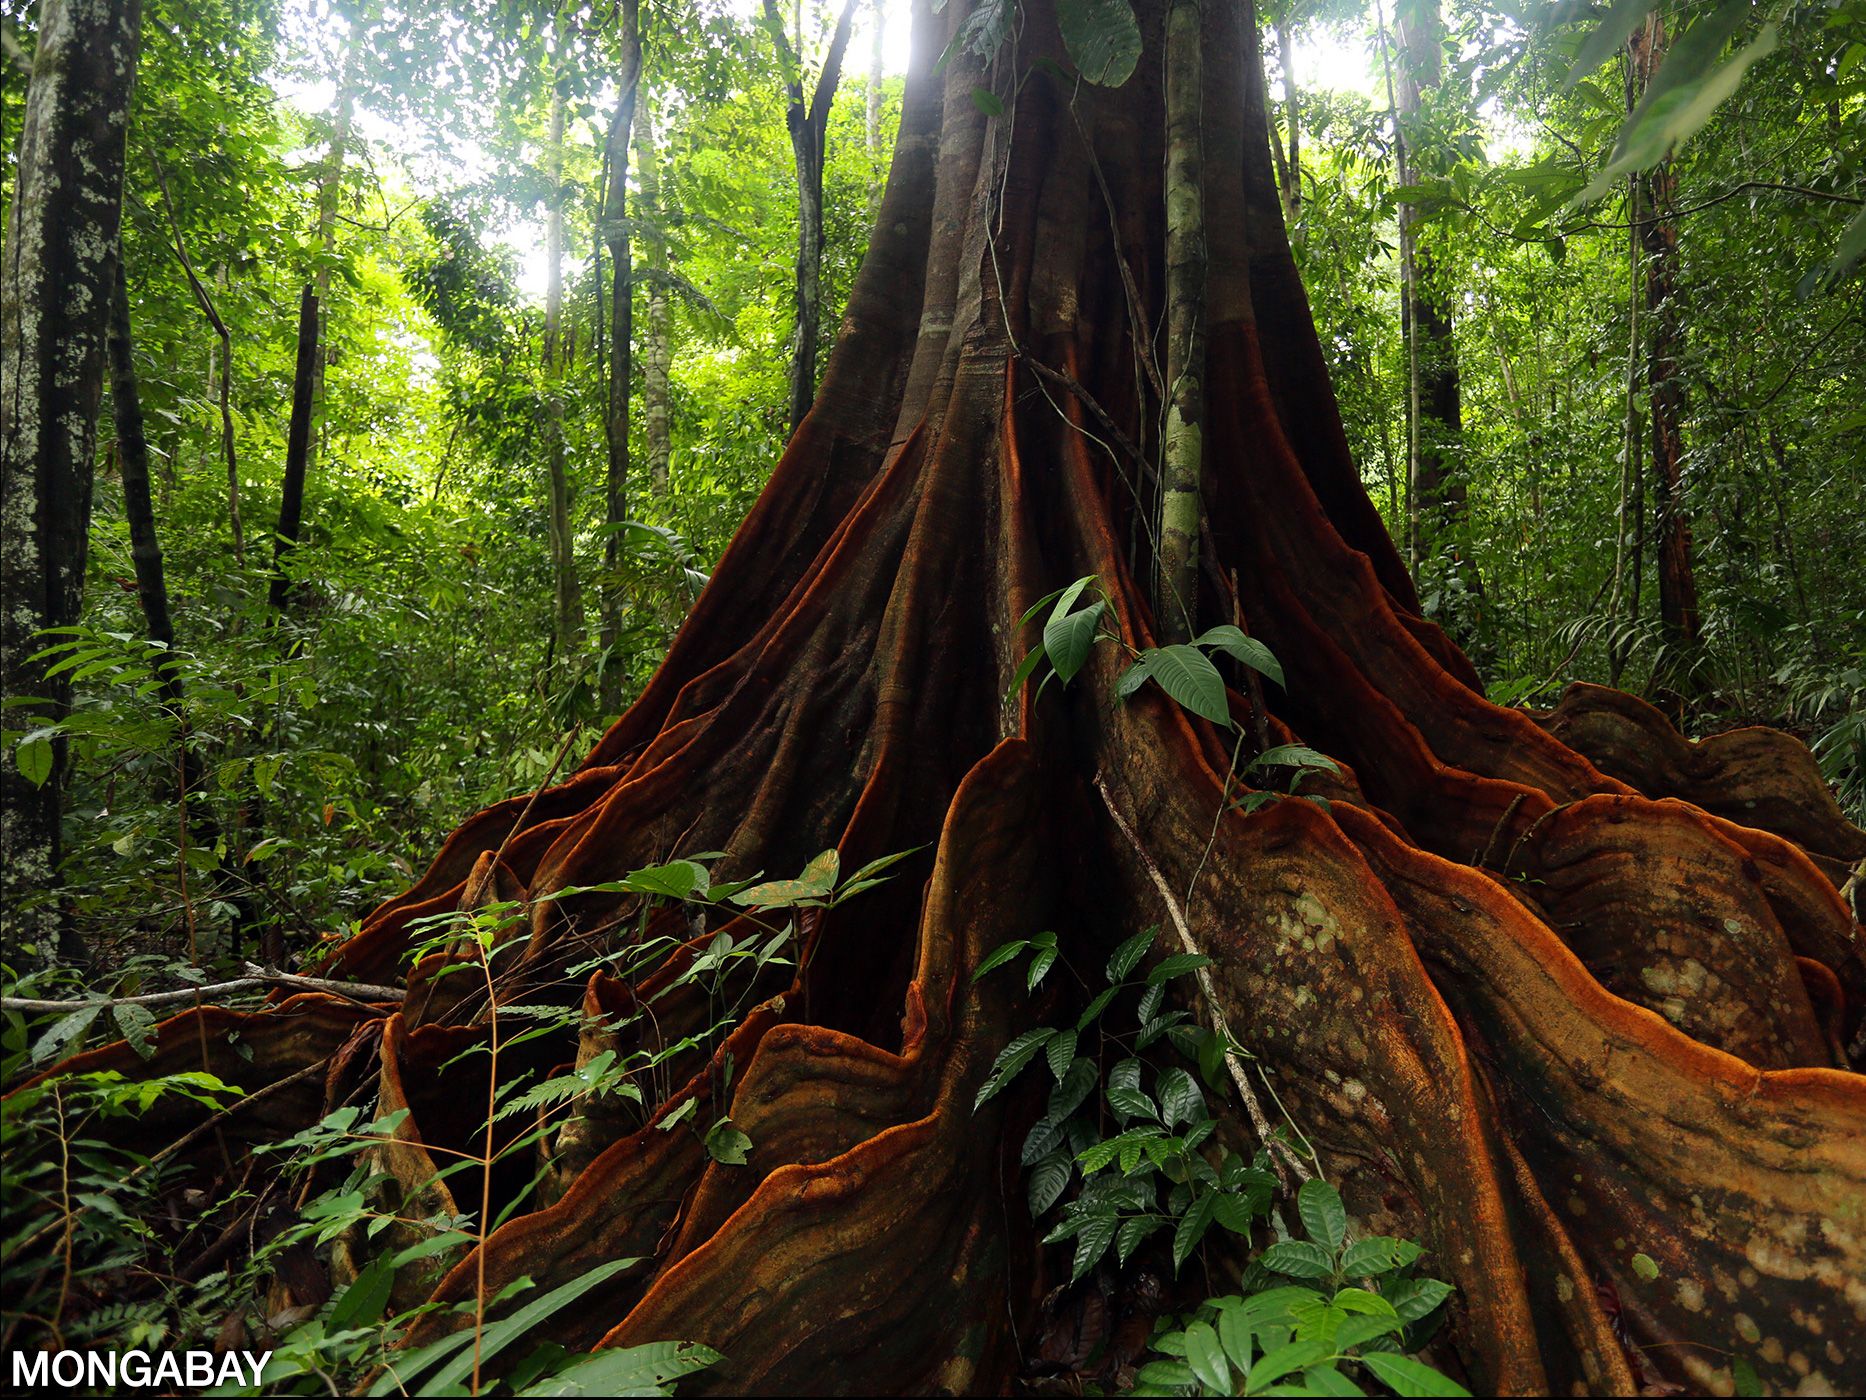 The ground layer of the rainforest